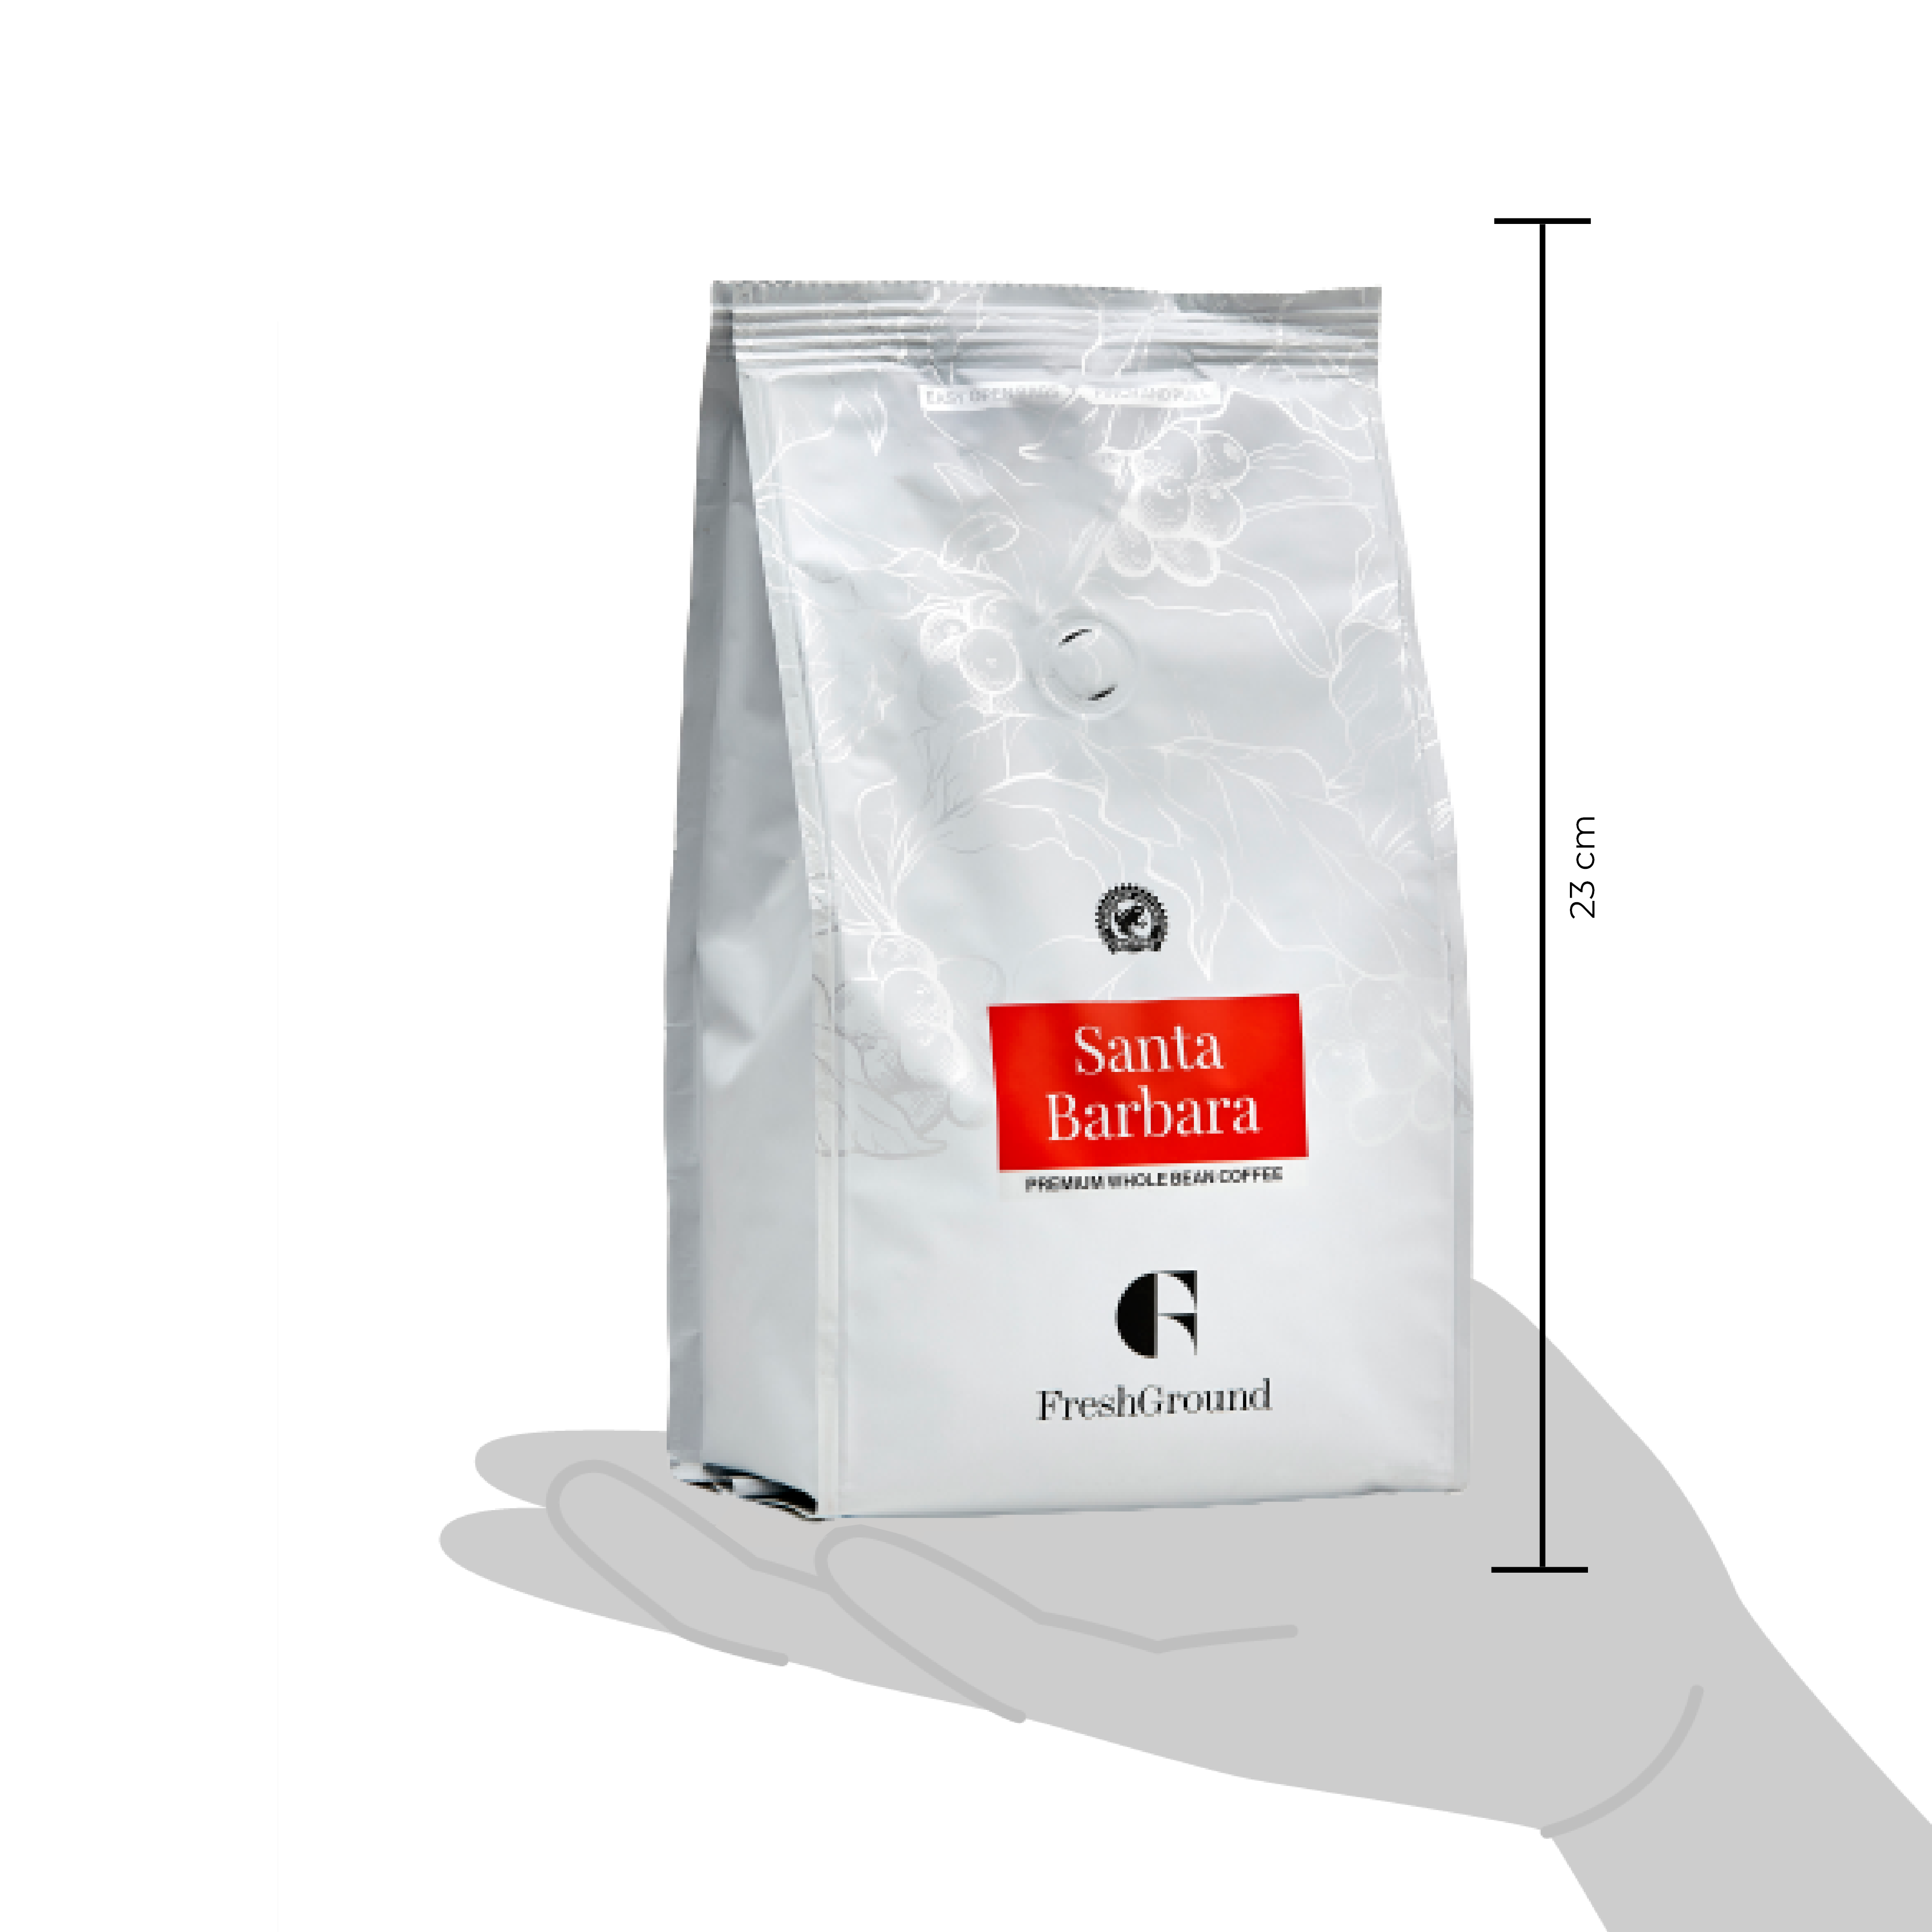 Scale image of whole bean coffee bag